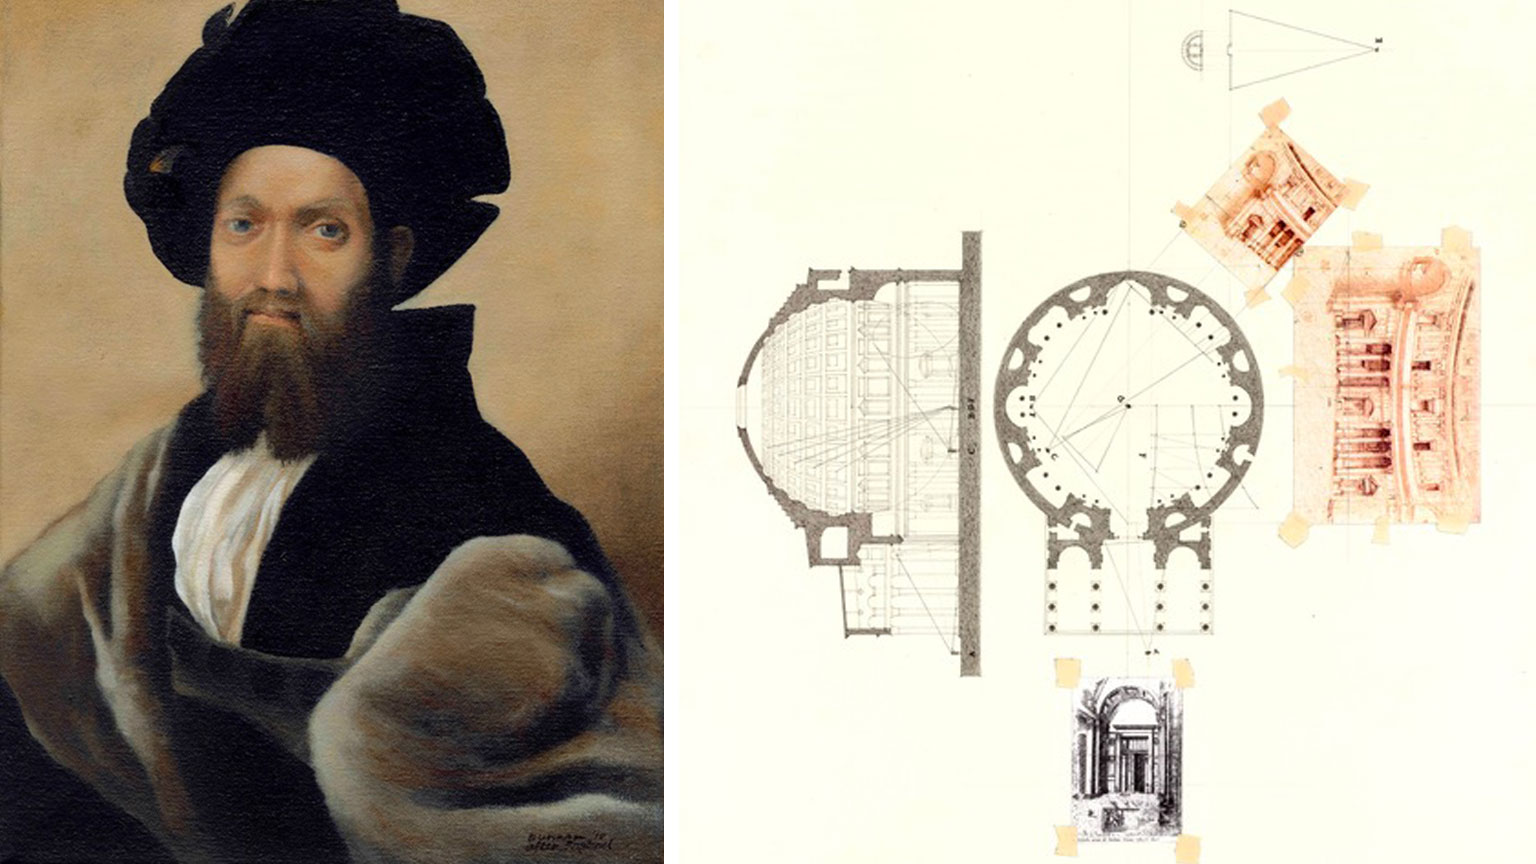 Painting of Raphael and sketch of the Pantheon